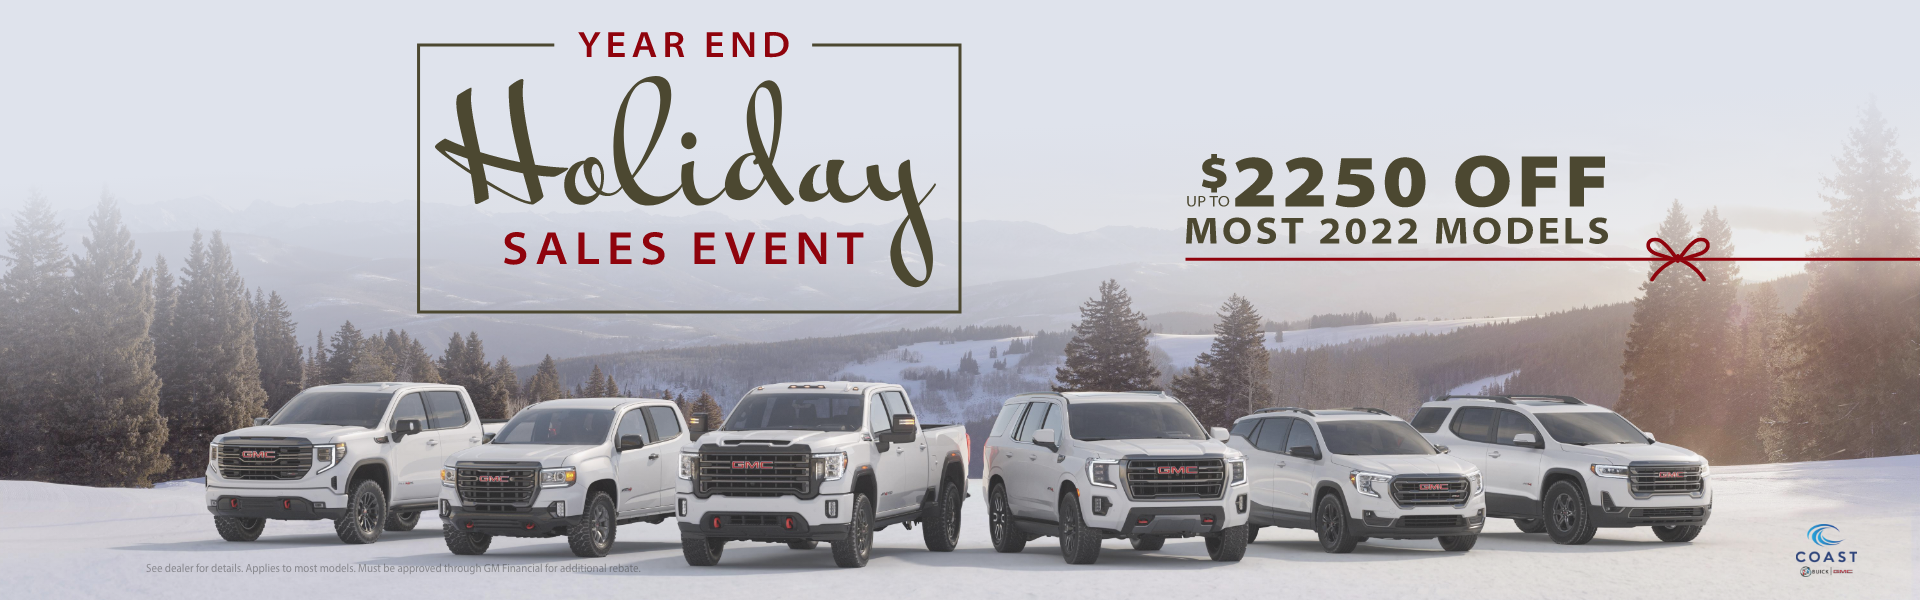 Year End Holiday Sales Event